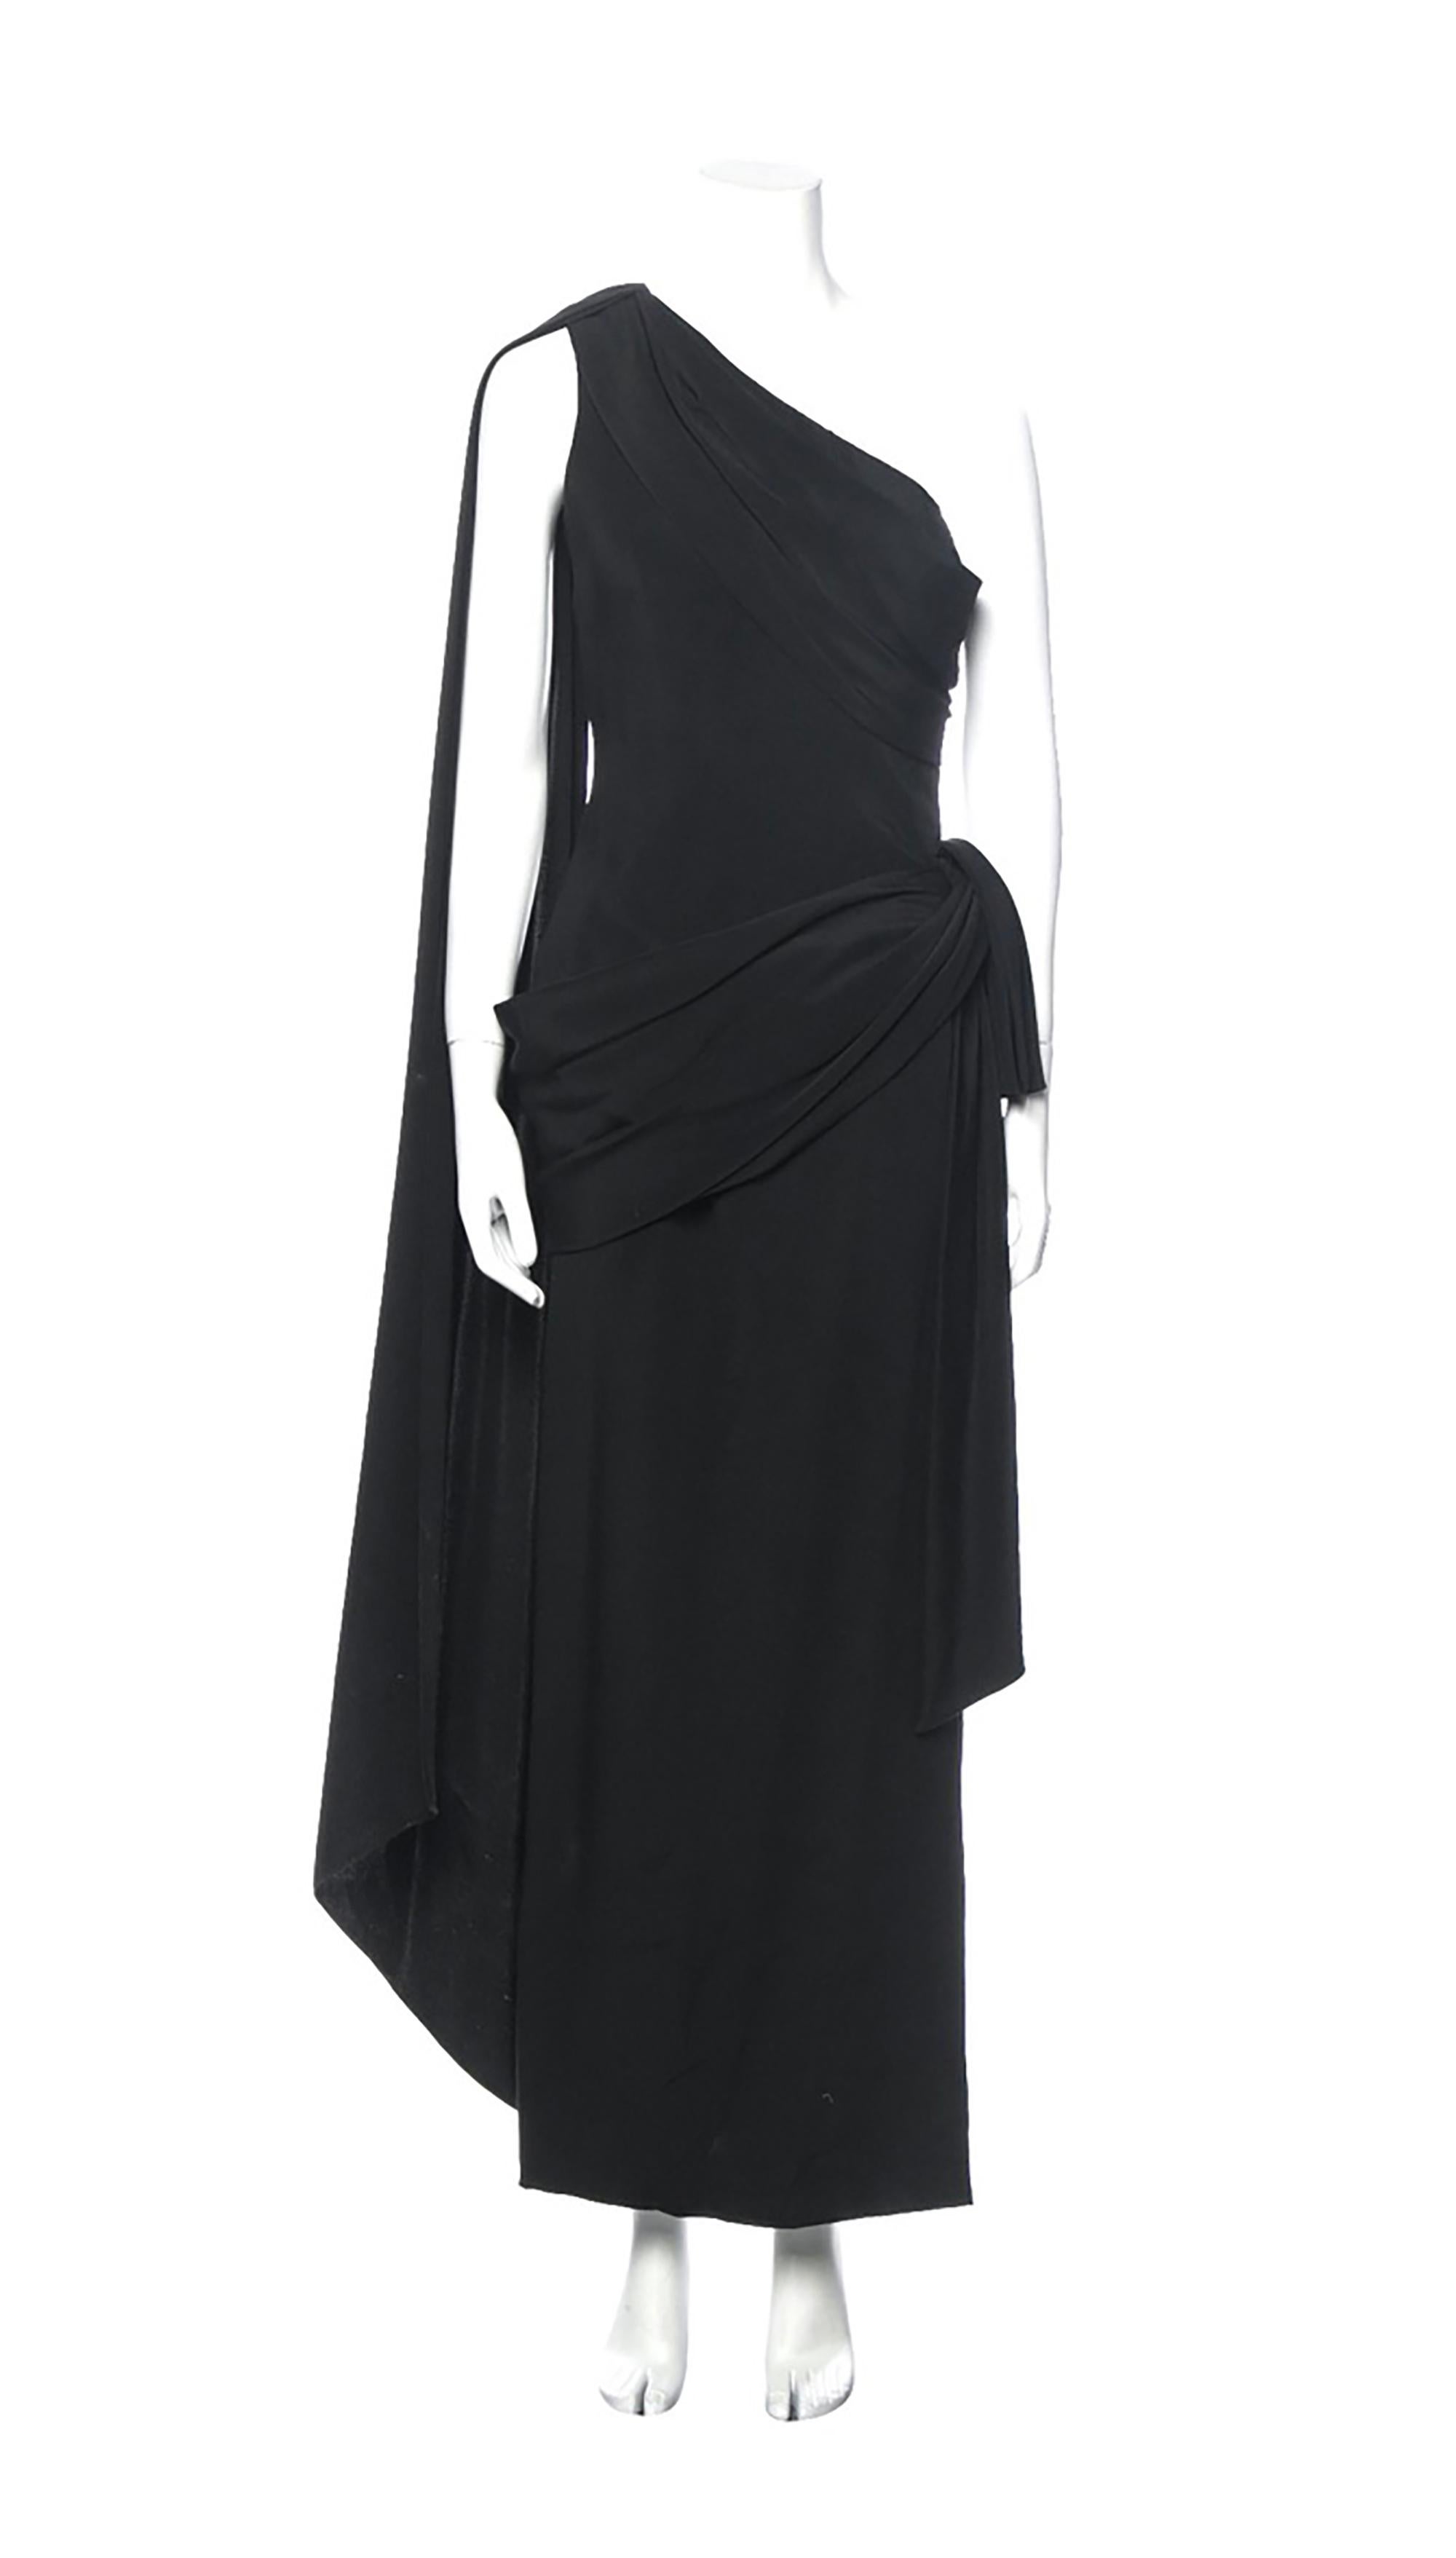 Late 80s- early 90s Givenchy Haute Couture one shoulder evening gown. 
Black
Side zipper
Silk blend fabric
Condition: Excellent
30